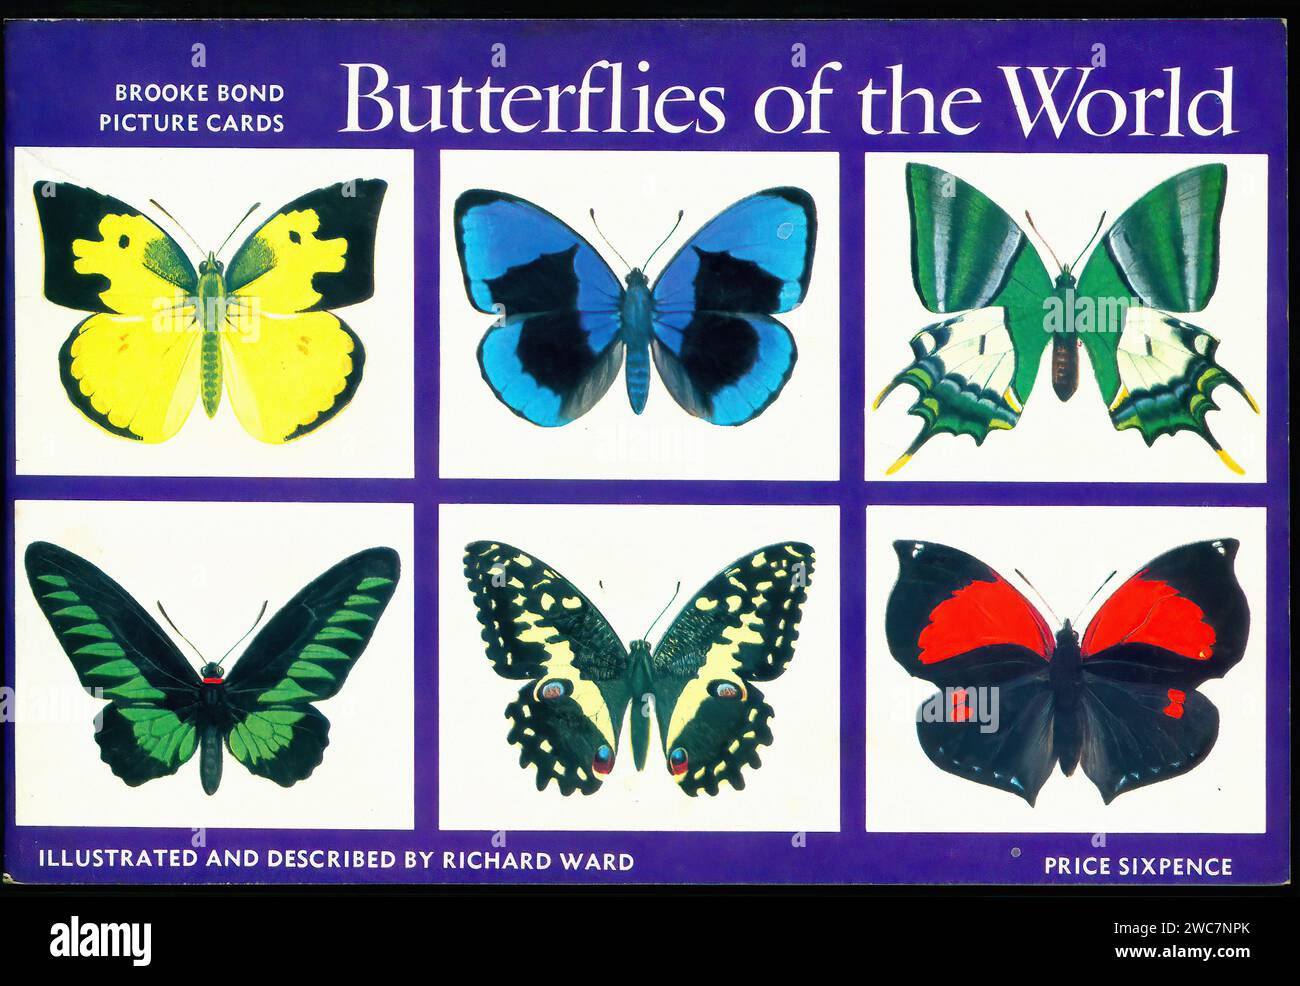 Butterflies of the World - Vintage Tradecard Album Front Illustration Stock Photo